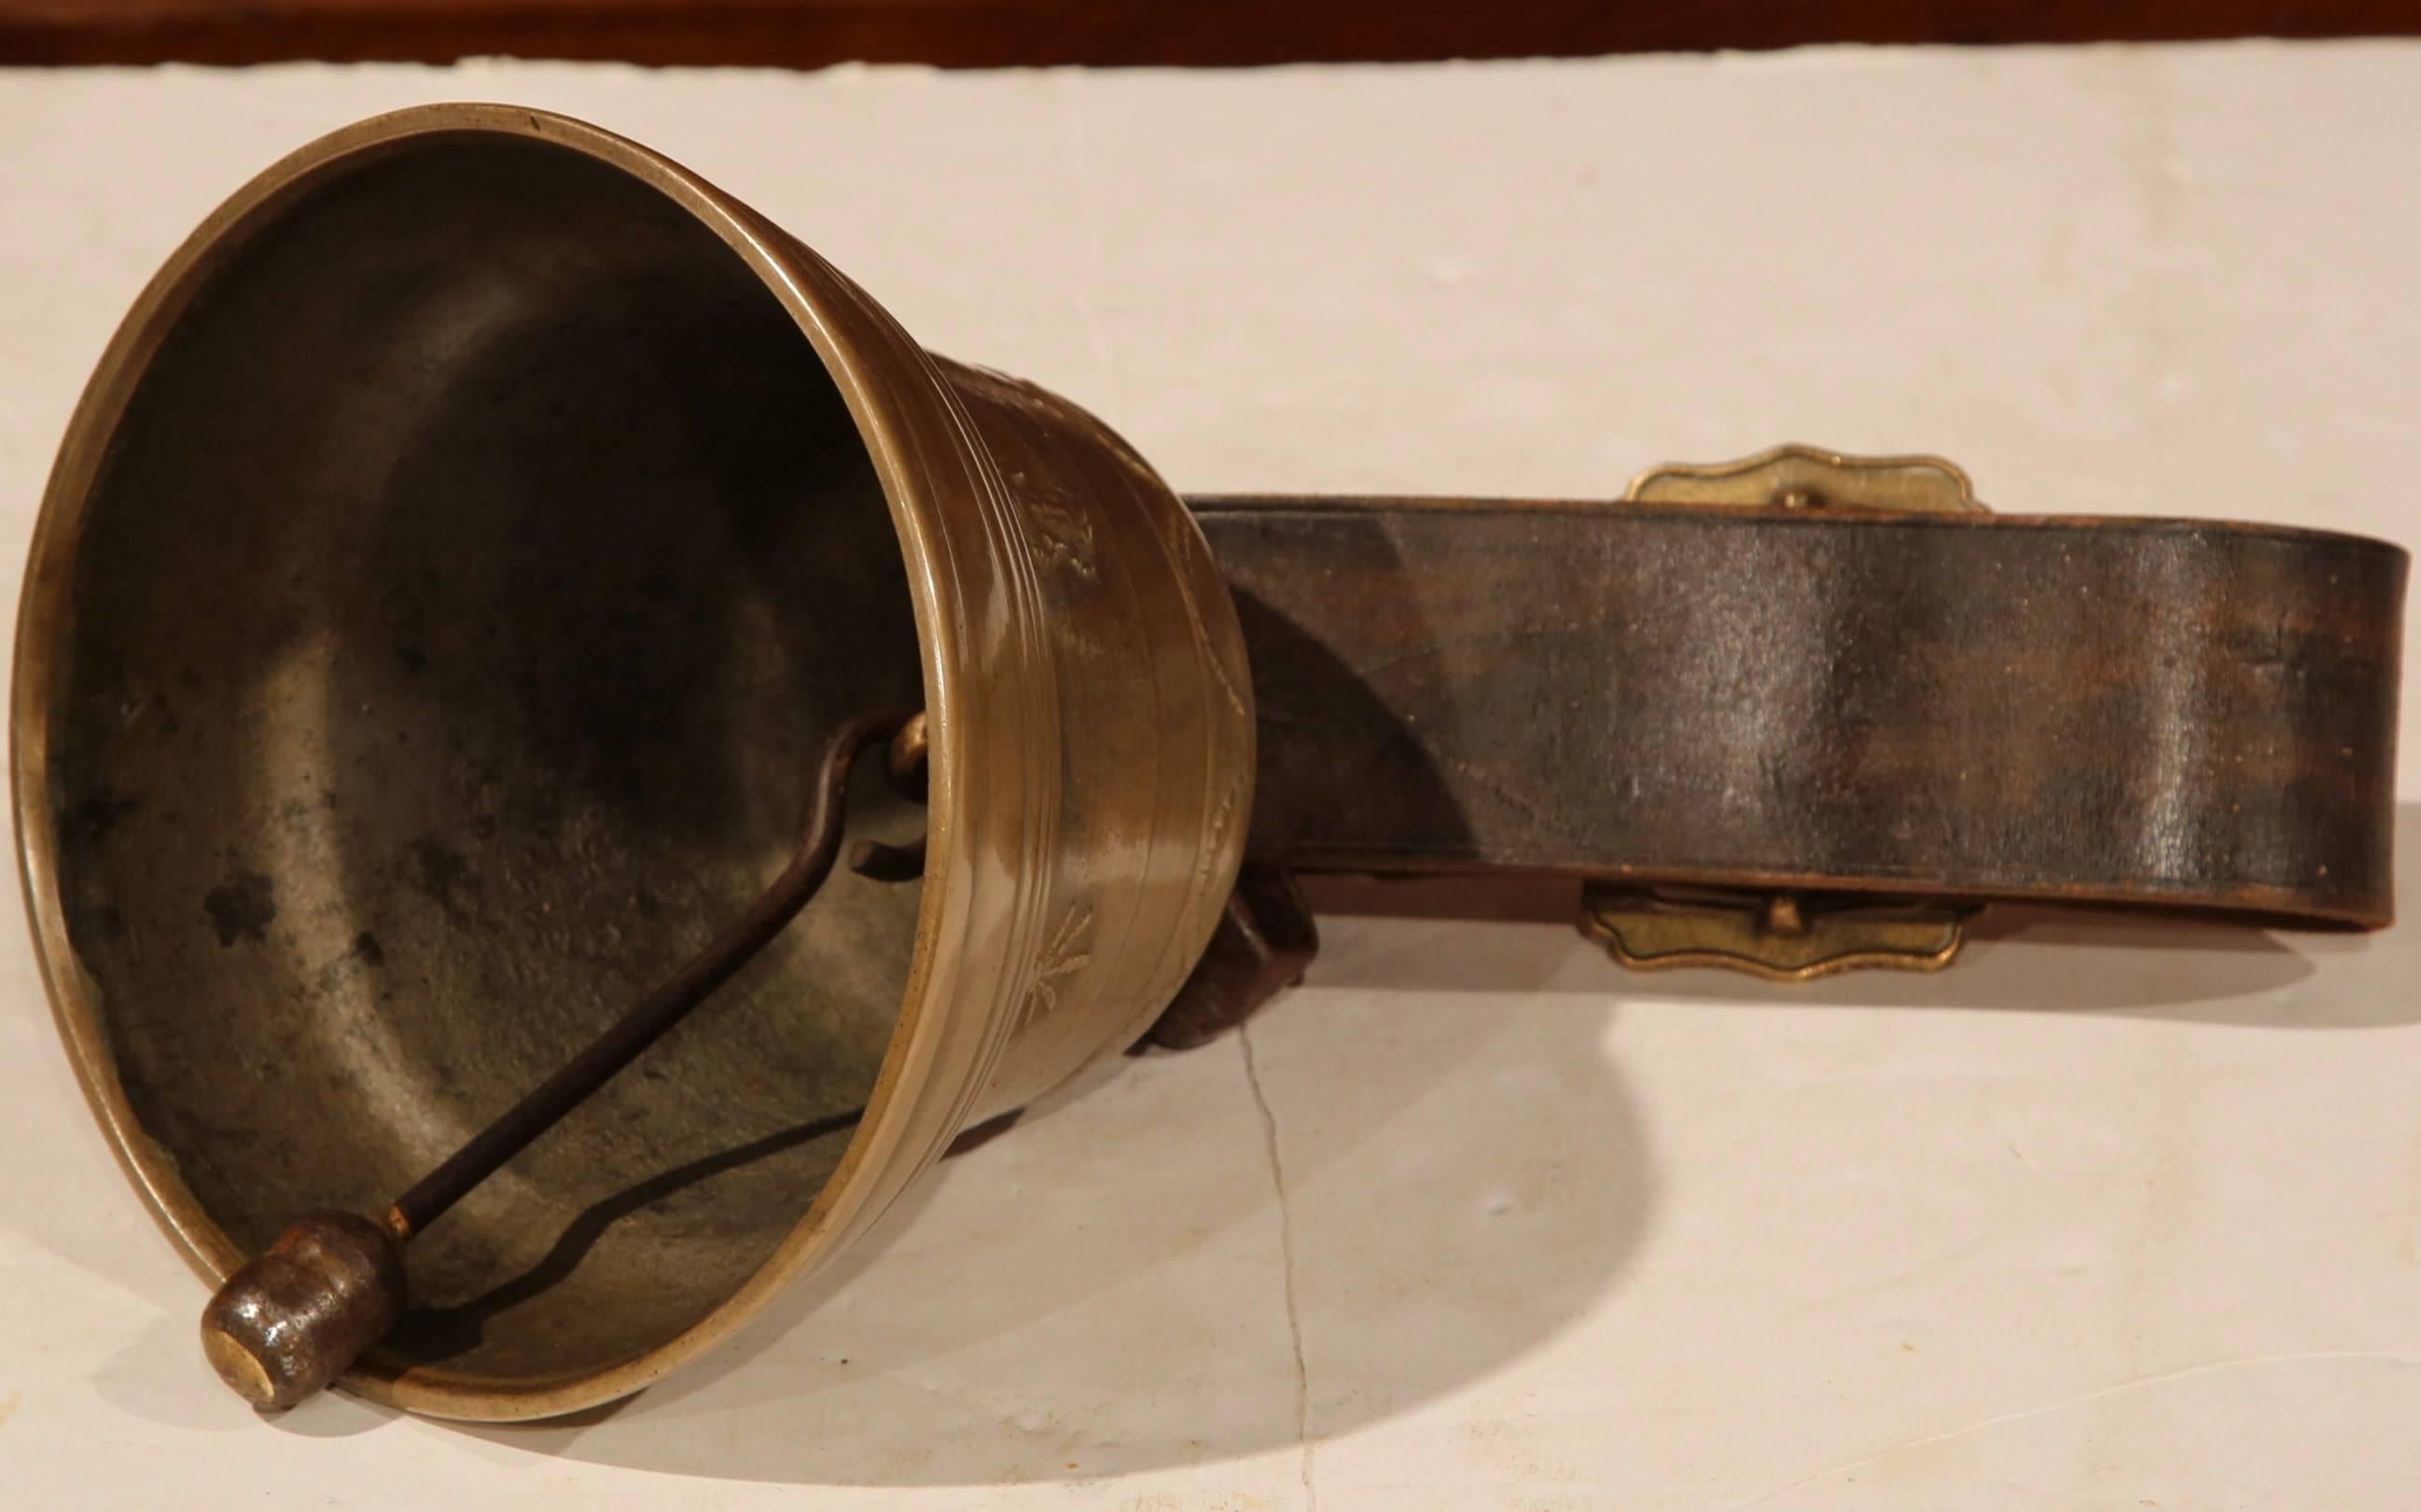 Hand-Crafted 19th Century French Signed Bronze Cow Bell with Original Leather Strap & Buckle